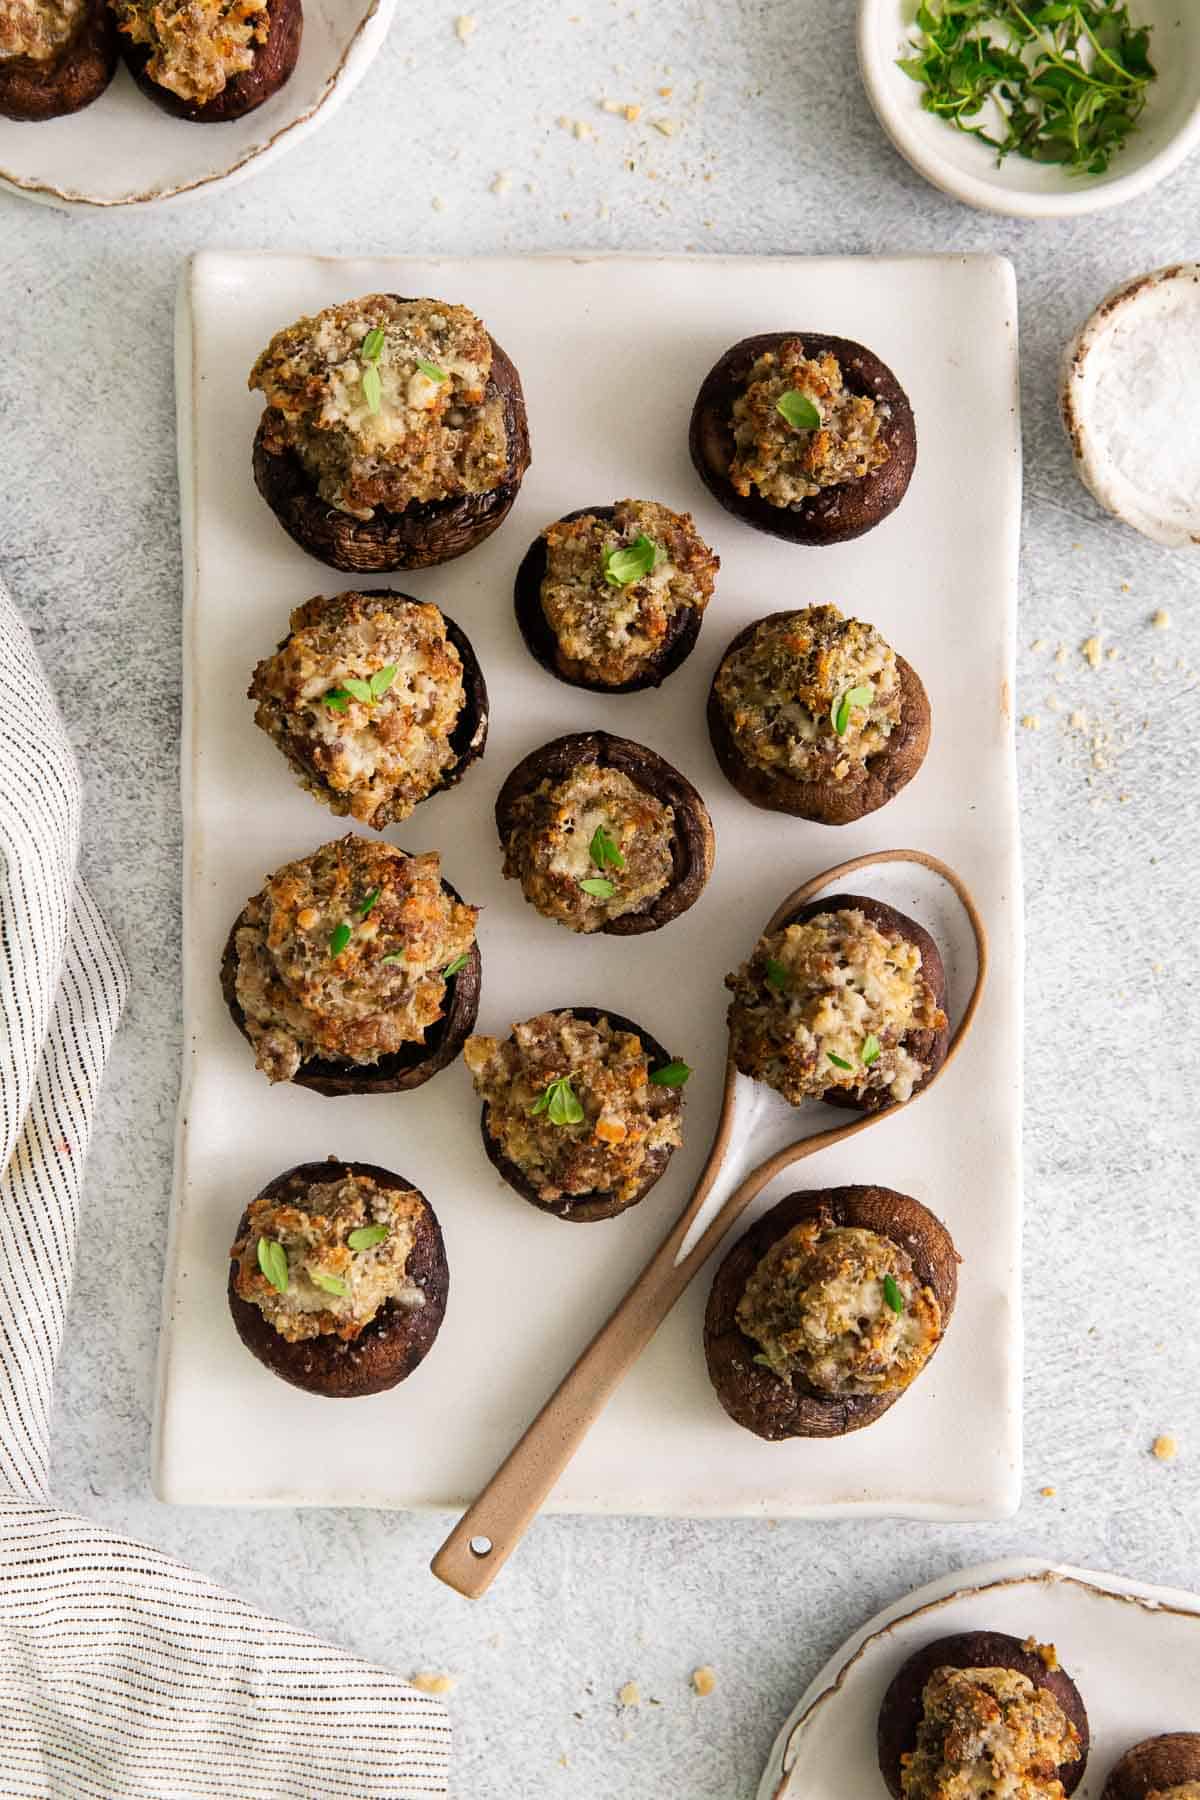 Gluten-free stuffed mushrooms on a platter with a serving spoon